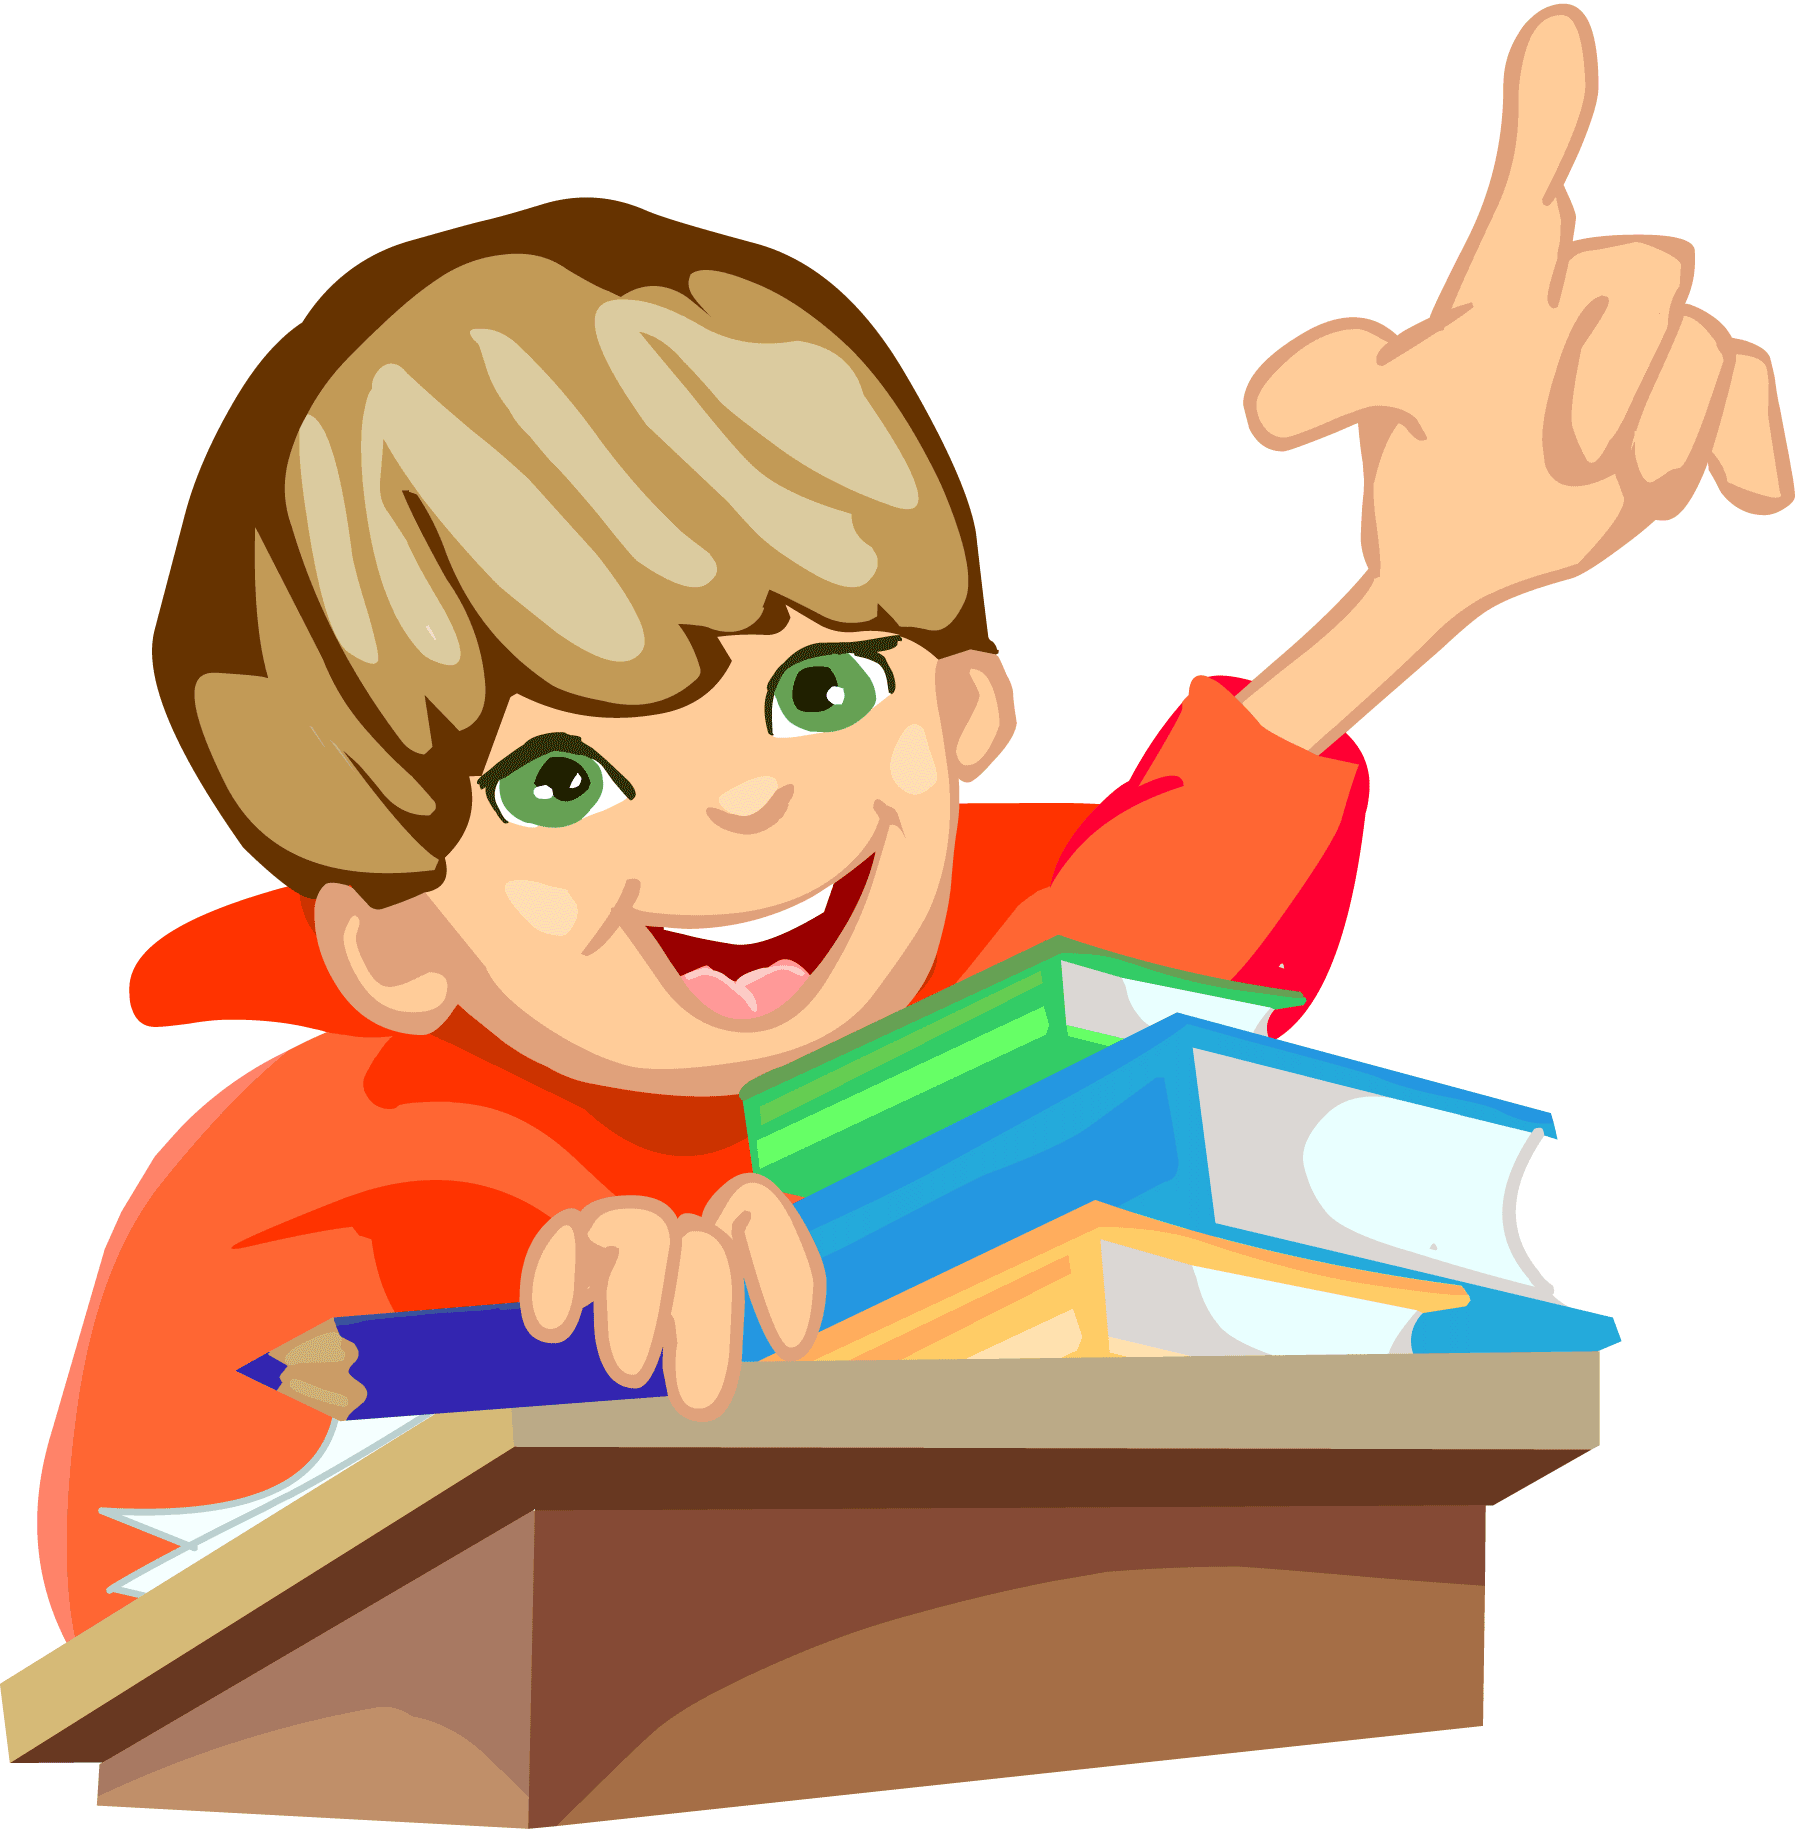 clip art of students in classroom - Seivo ...